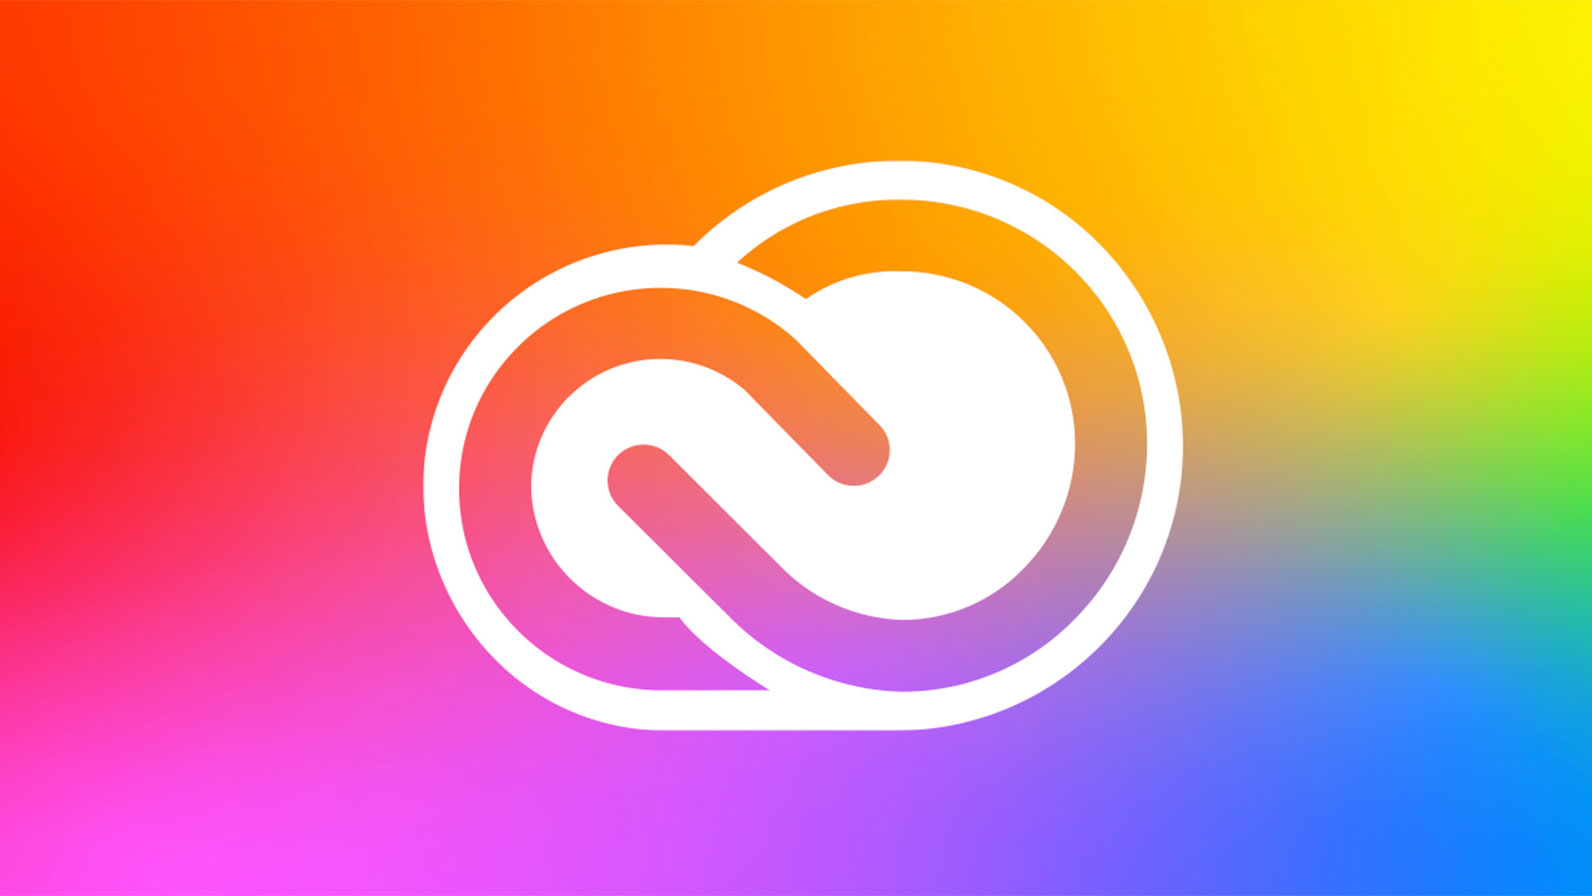 Get 1 Month Free and save over 65% for your first year of Adobe Creative Cloud